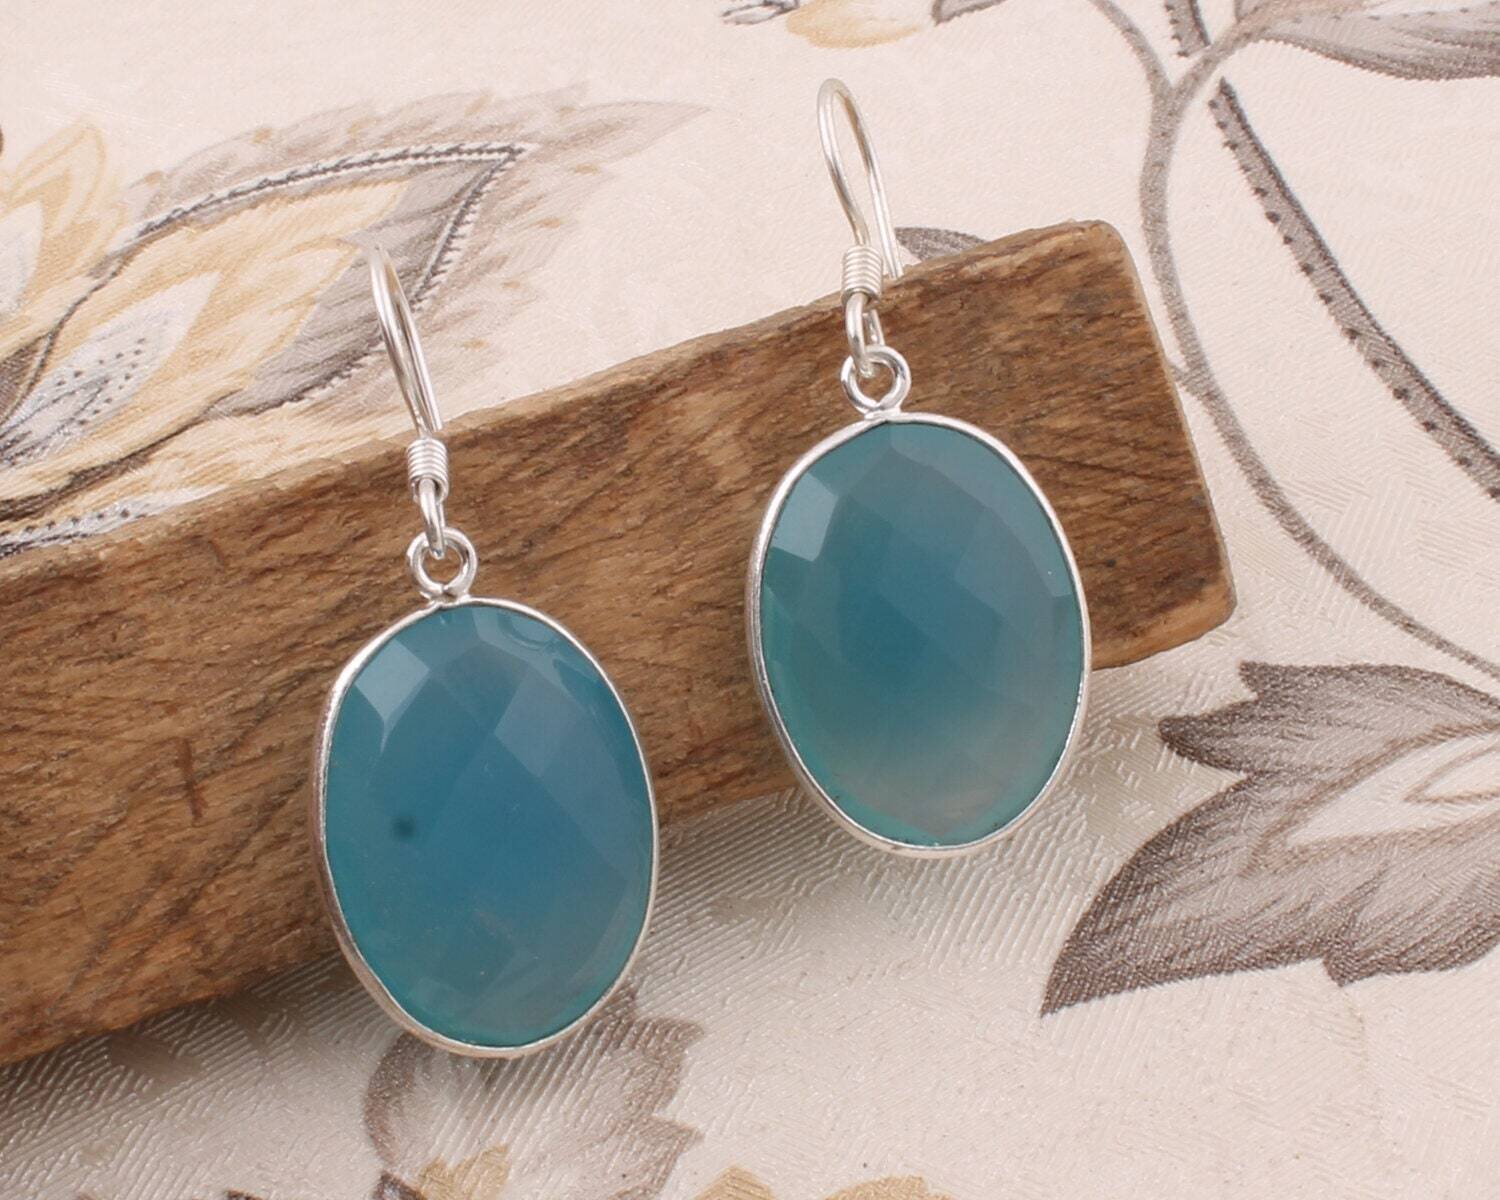 Natural Beautiful Onyx Gemstone Earring With Cut & Transparency Stone Boho Earring 925 Sterling Silver Solid Earring Handcrafted L#-283331-E